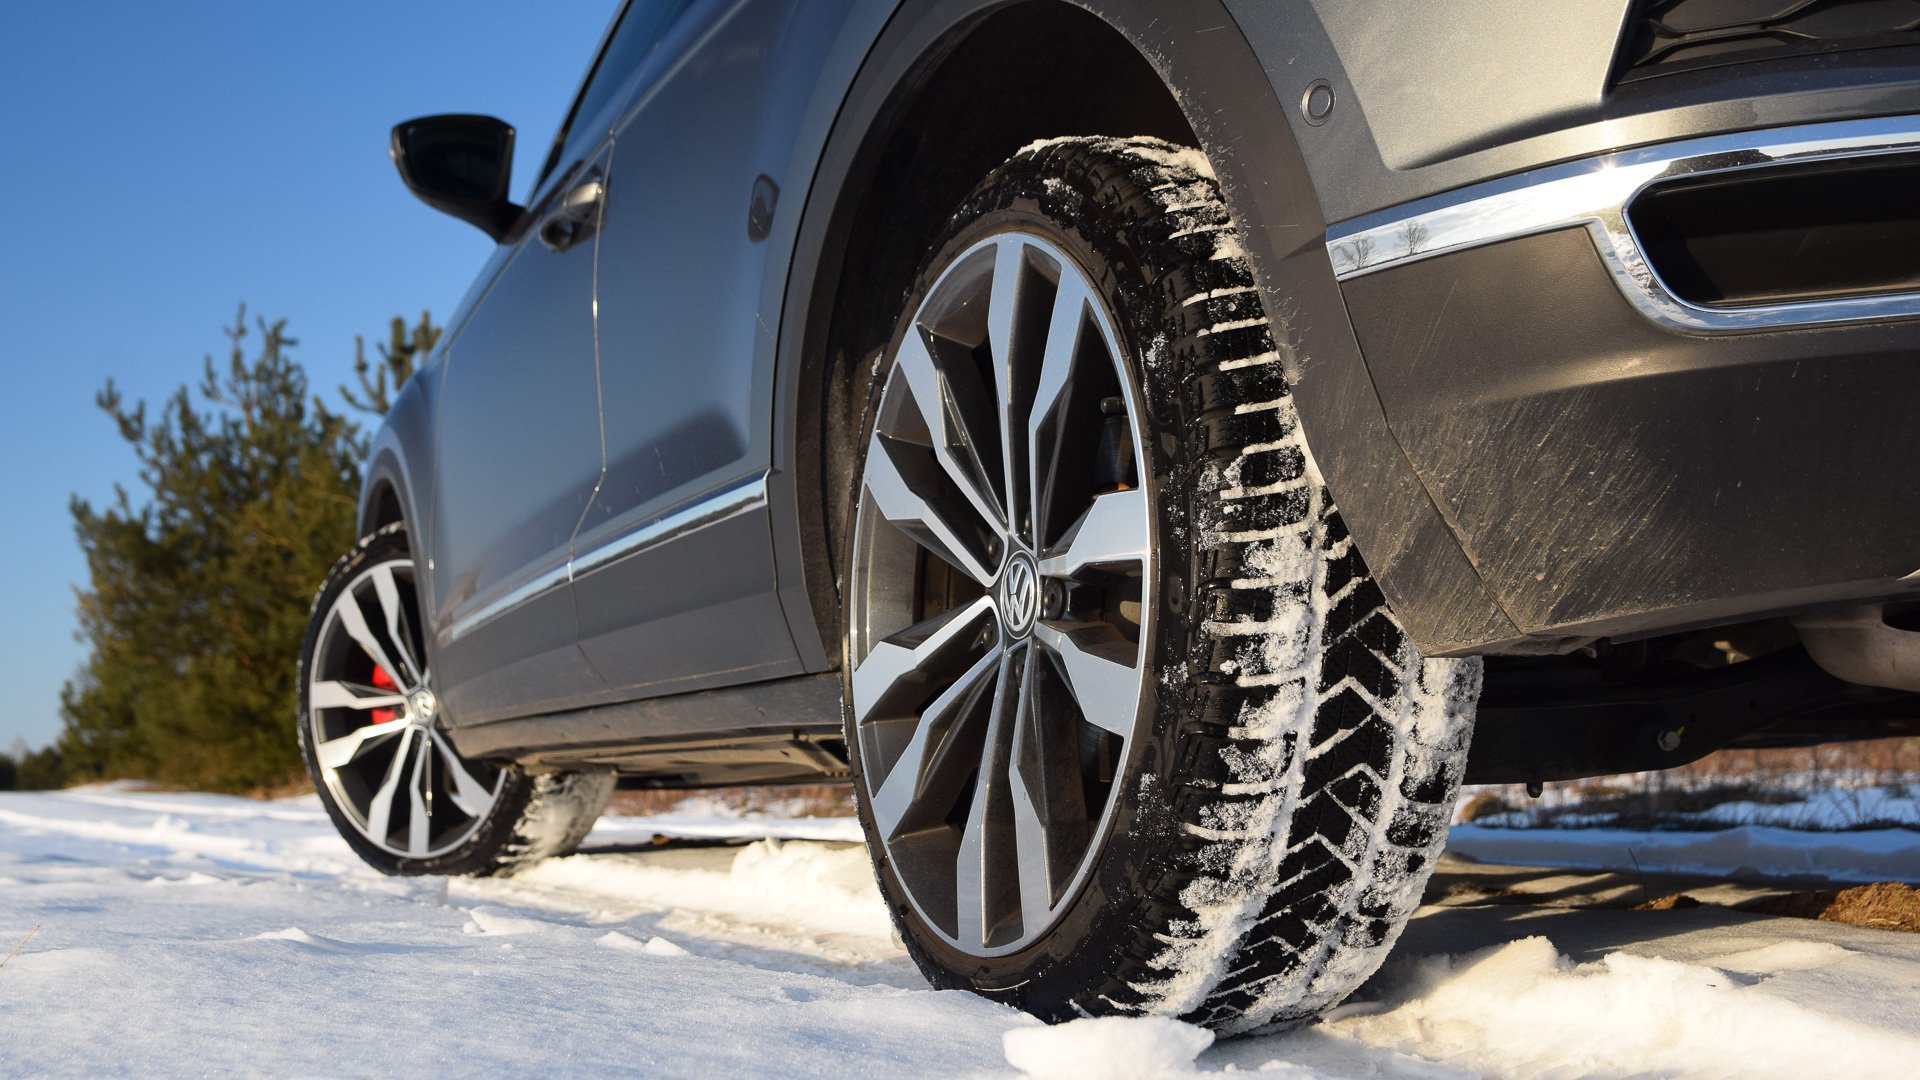 13 Things You Should Do To Keep Your Car Running Smoothly All Winter